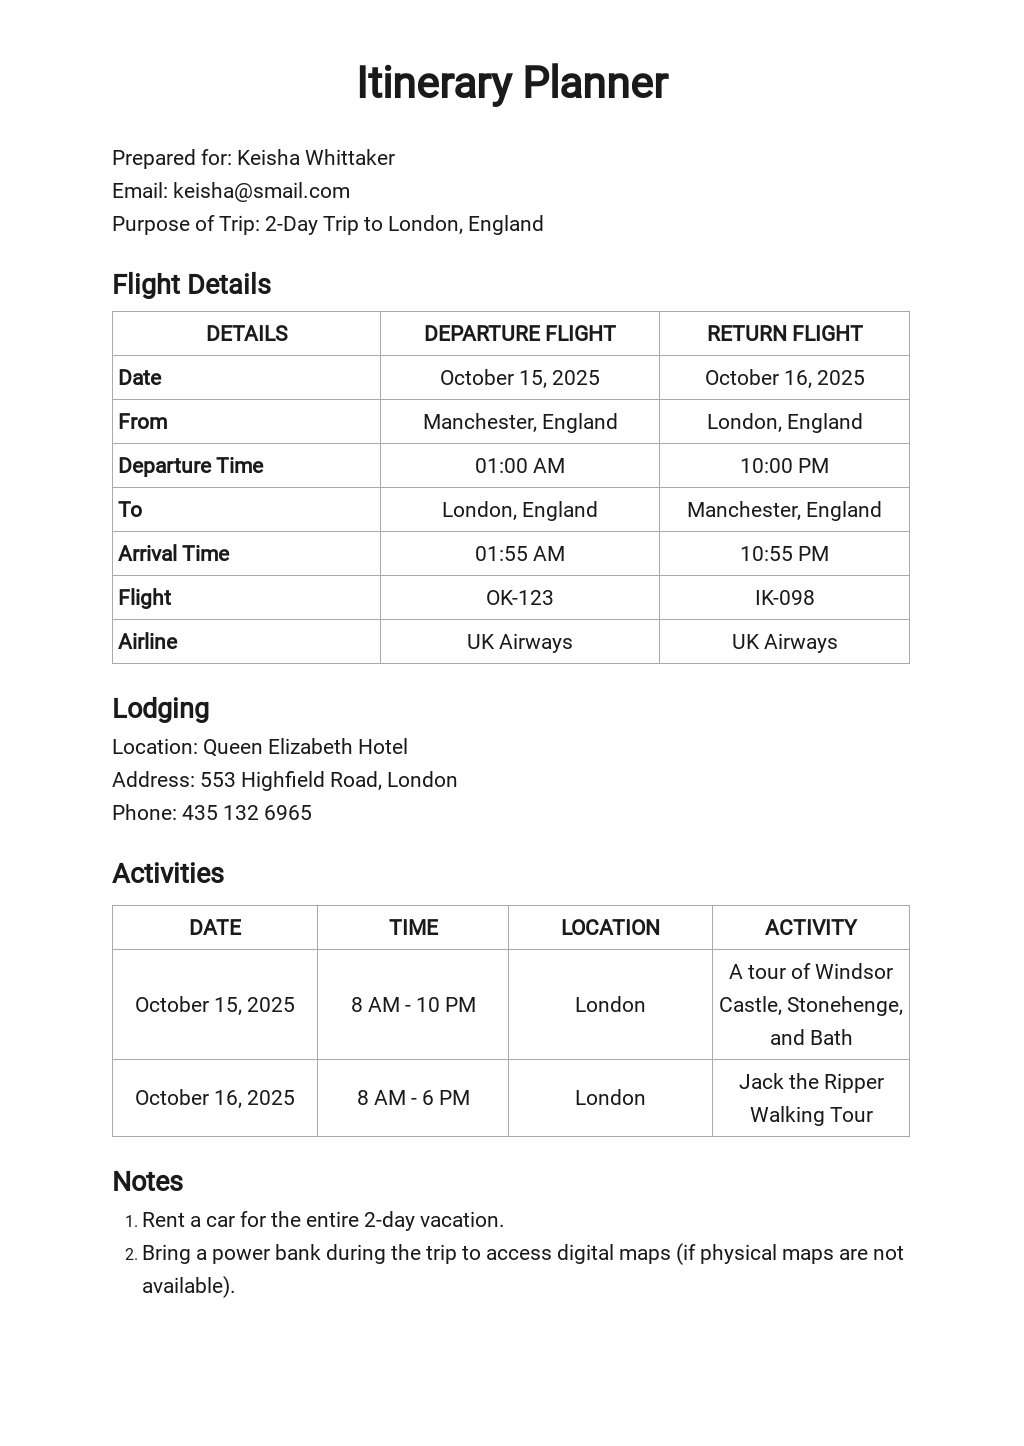 Free Sample Itinerary Planner Template.jpe